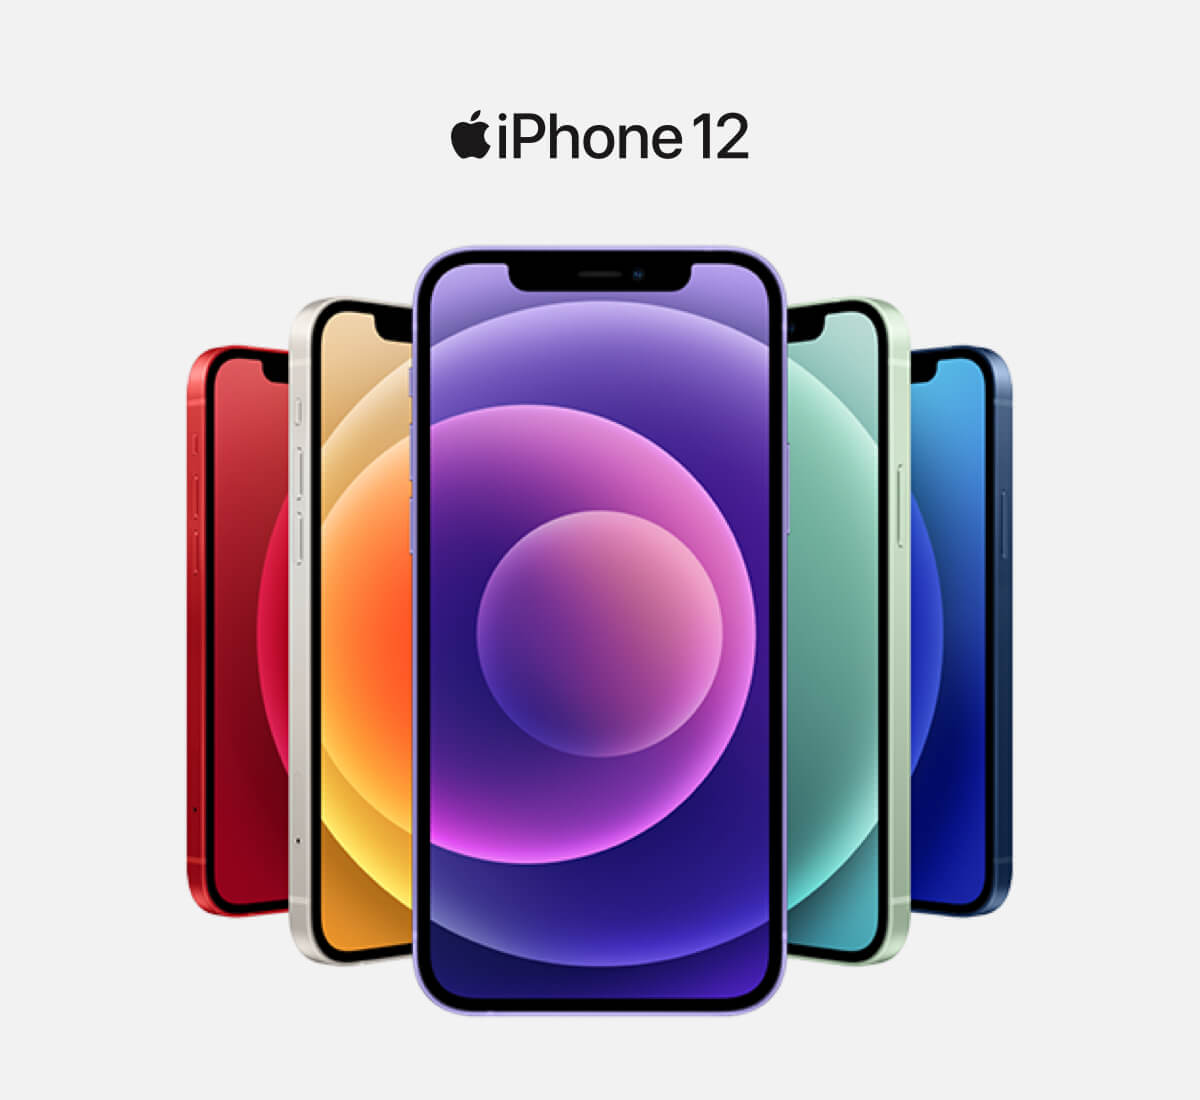 image of five iPhone 12s in red, orange, purple, green and blue.